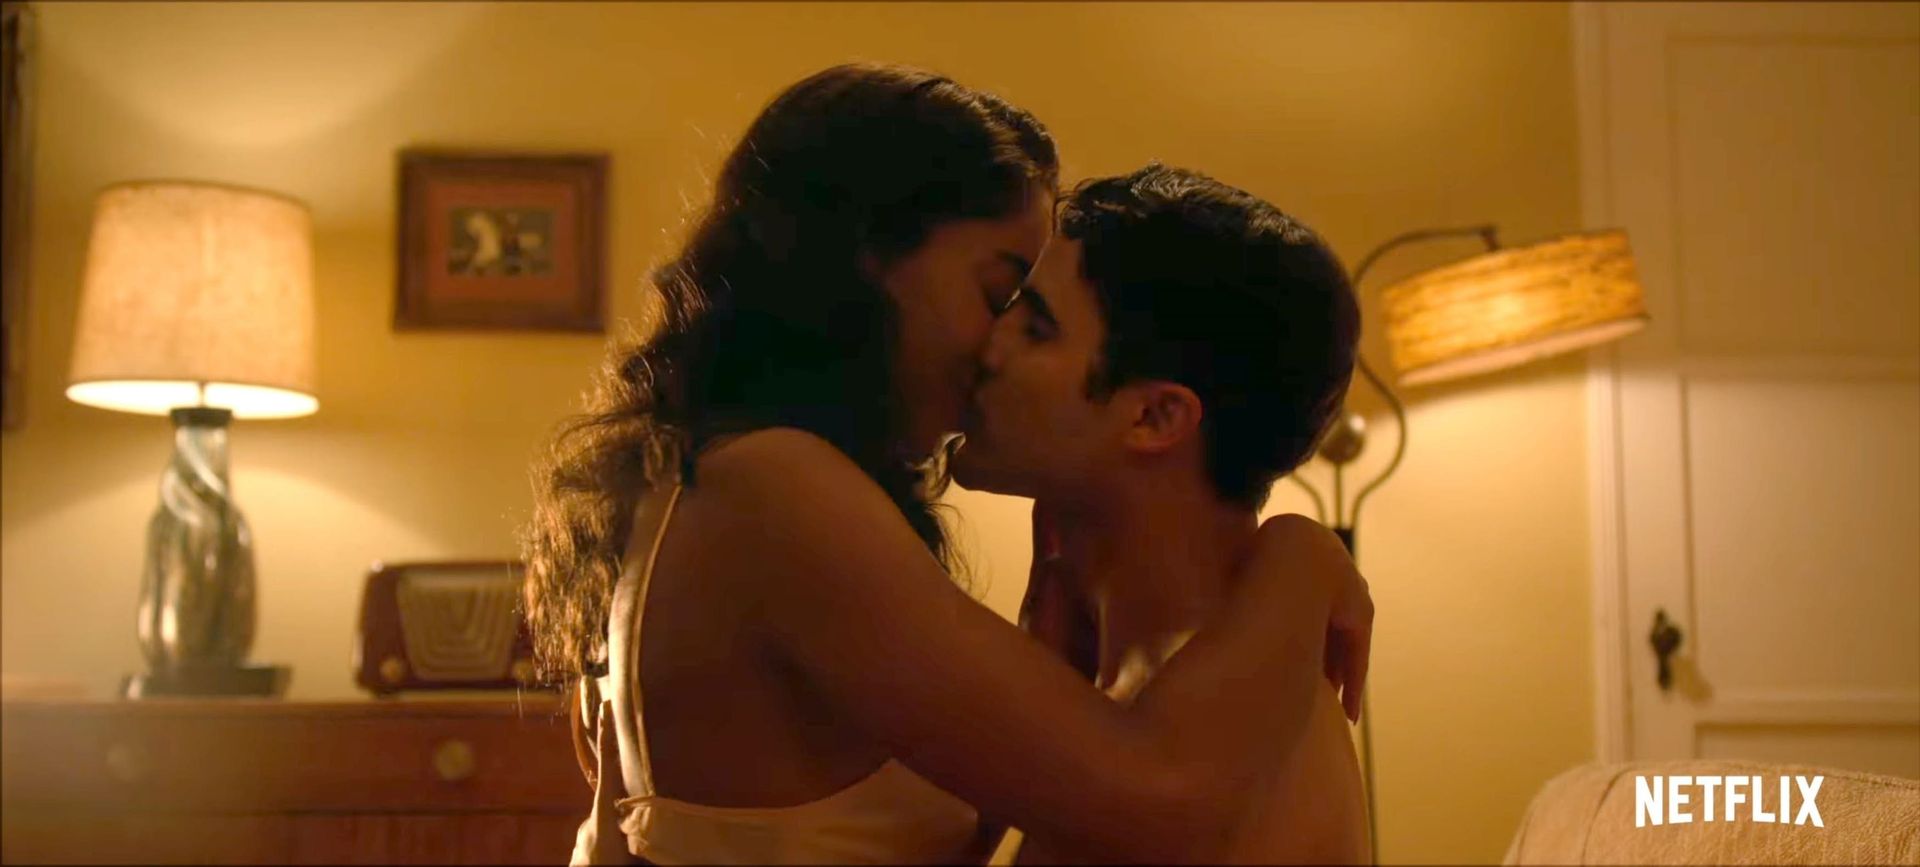 Darren Criss  Laura Harrier Steam Up the Screen in the Trailer for the New TV show Hollywood (33 Pics + Video)